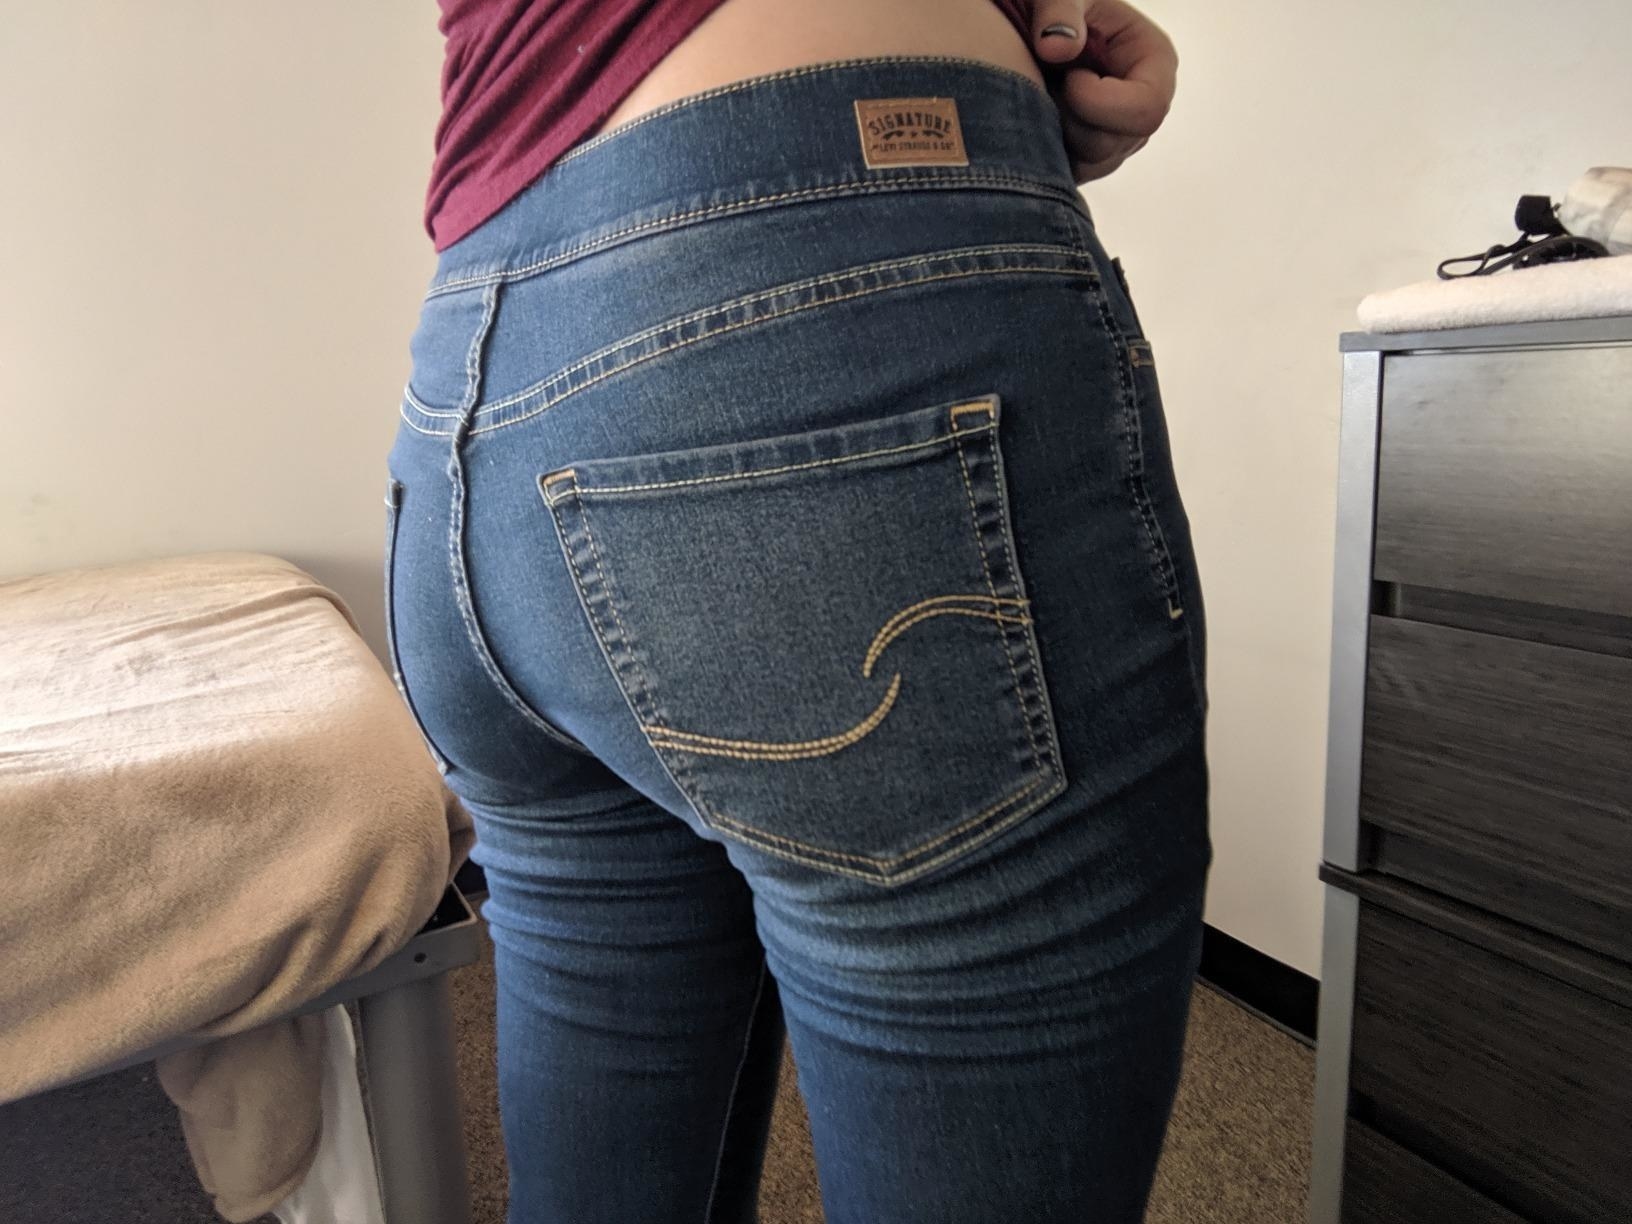 Tight jeans are a treat on her hot ass